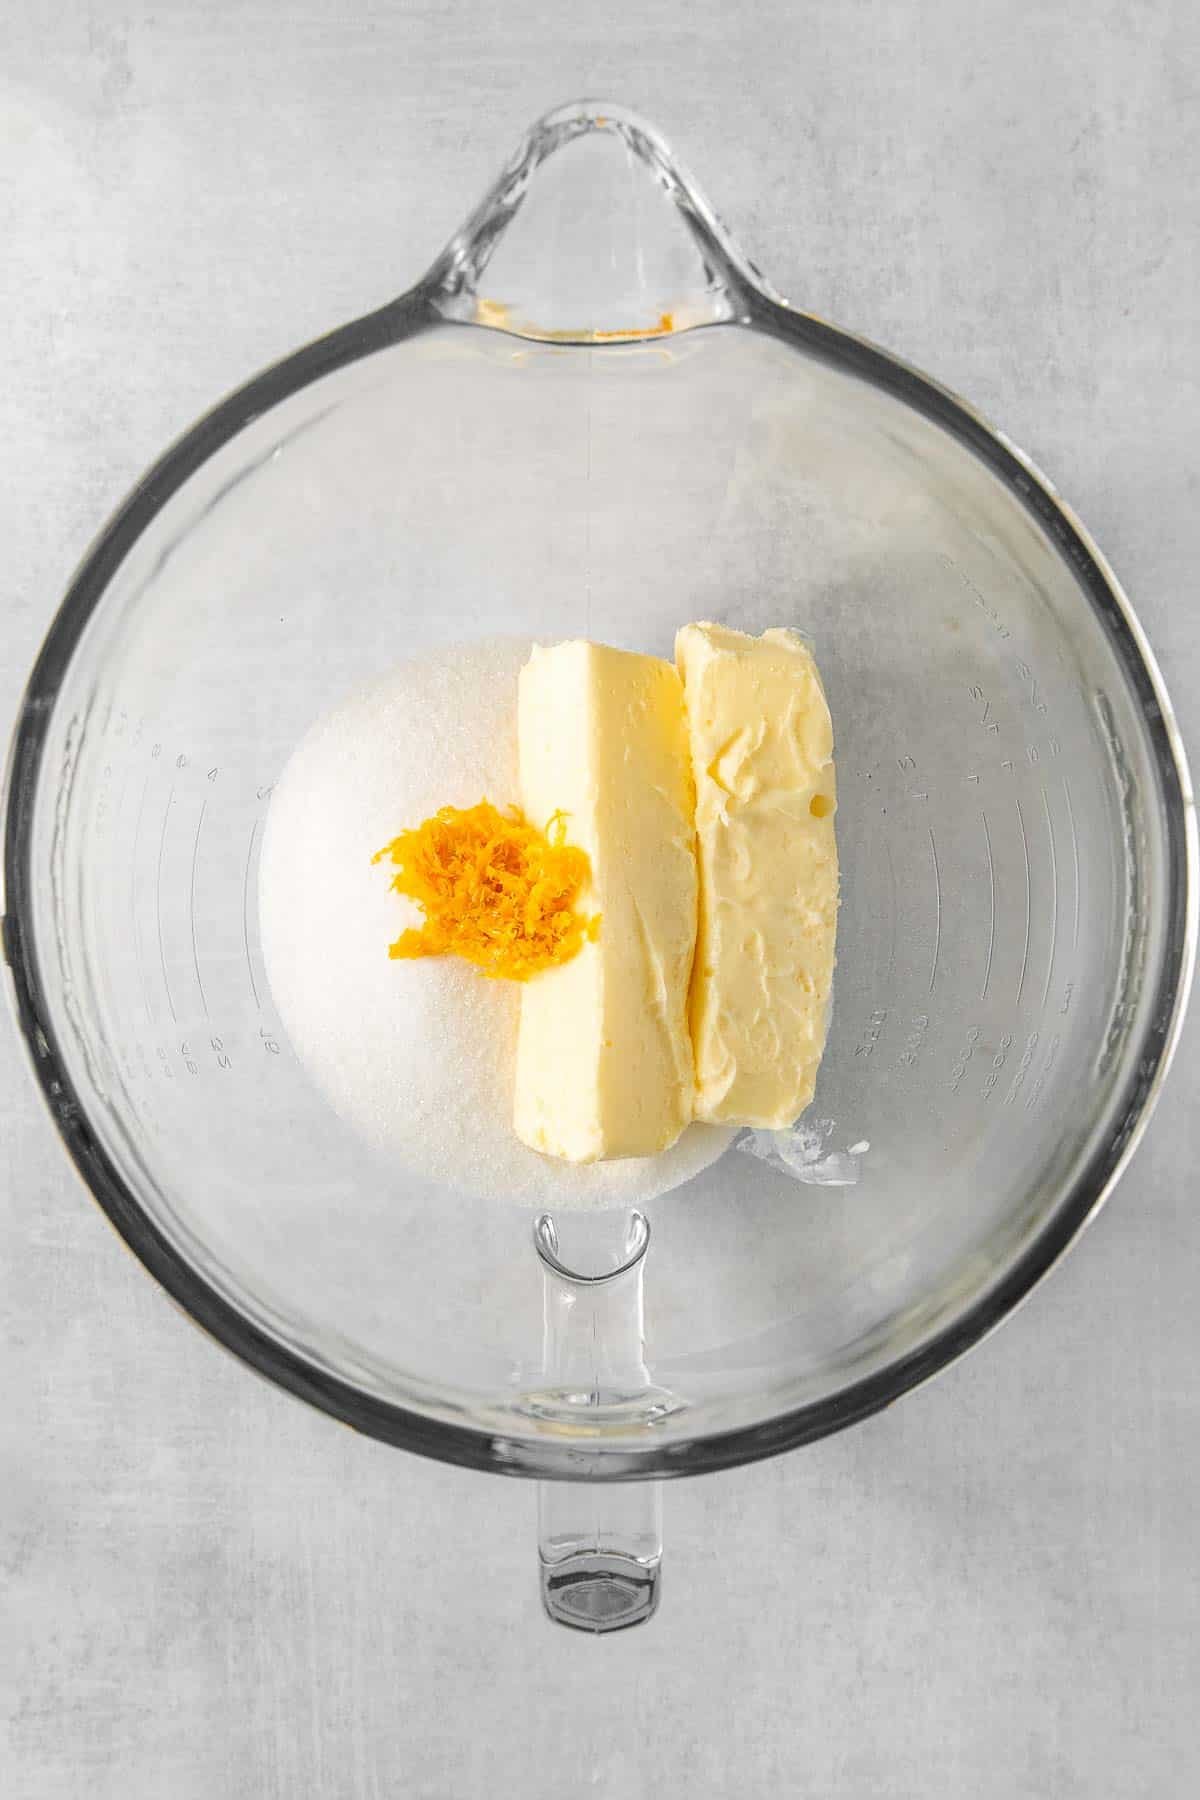 Butter, sugar and orange zest in a glass mixing bowl.